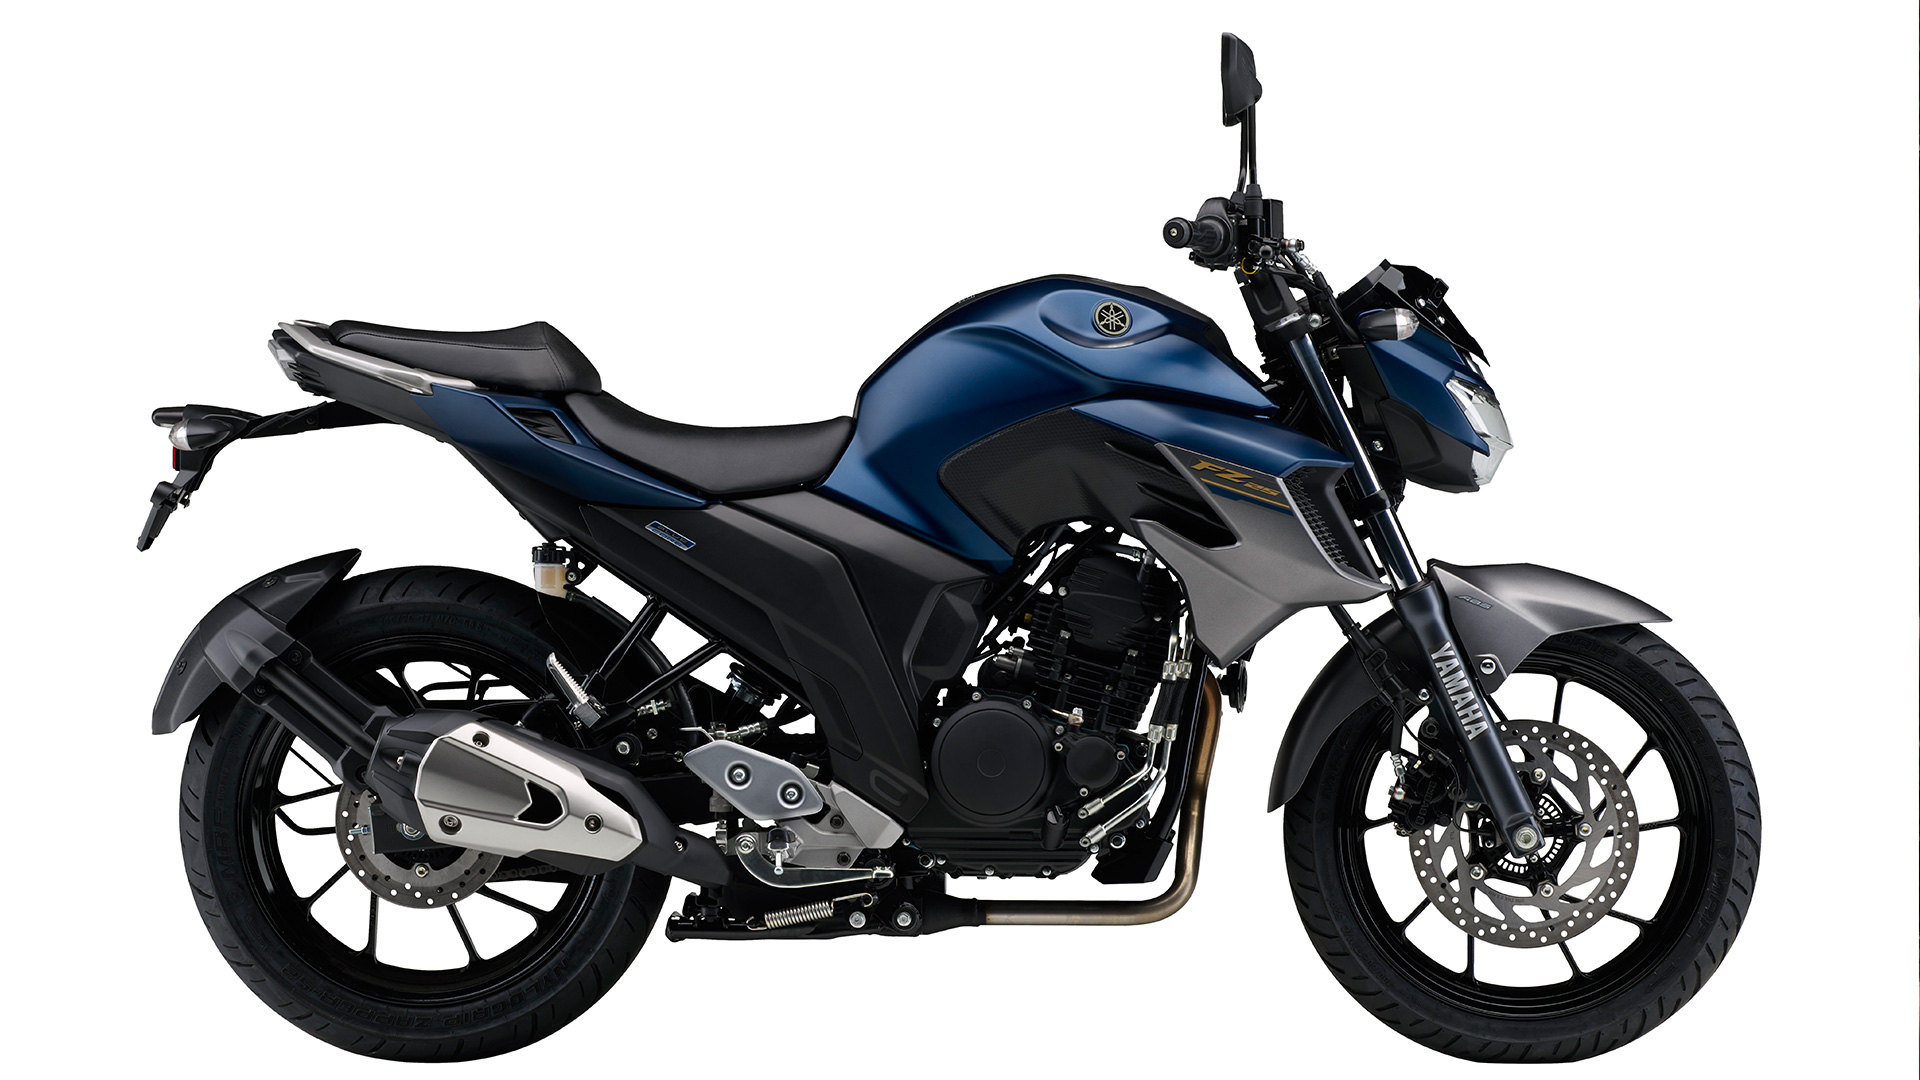 2020 Yamaha FZ 25 specifications and pictures